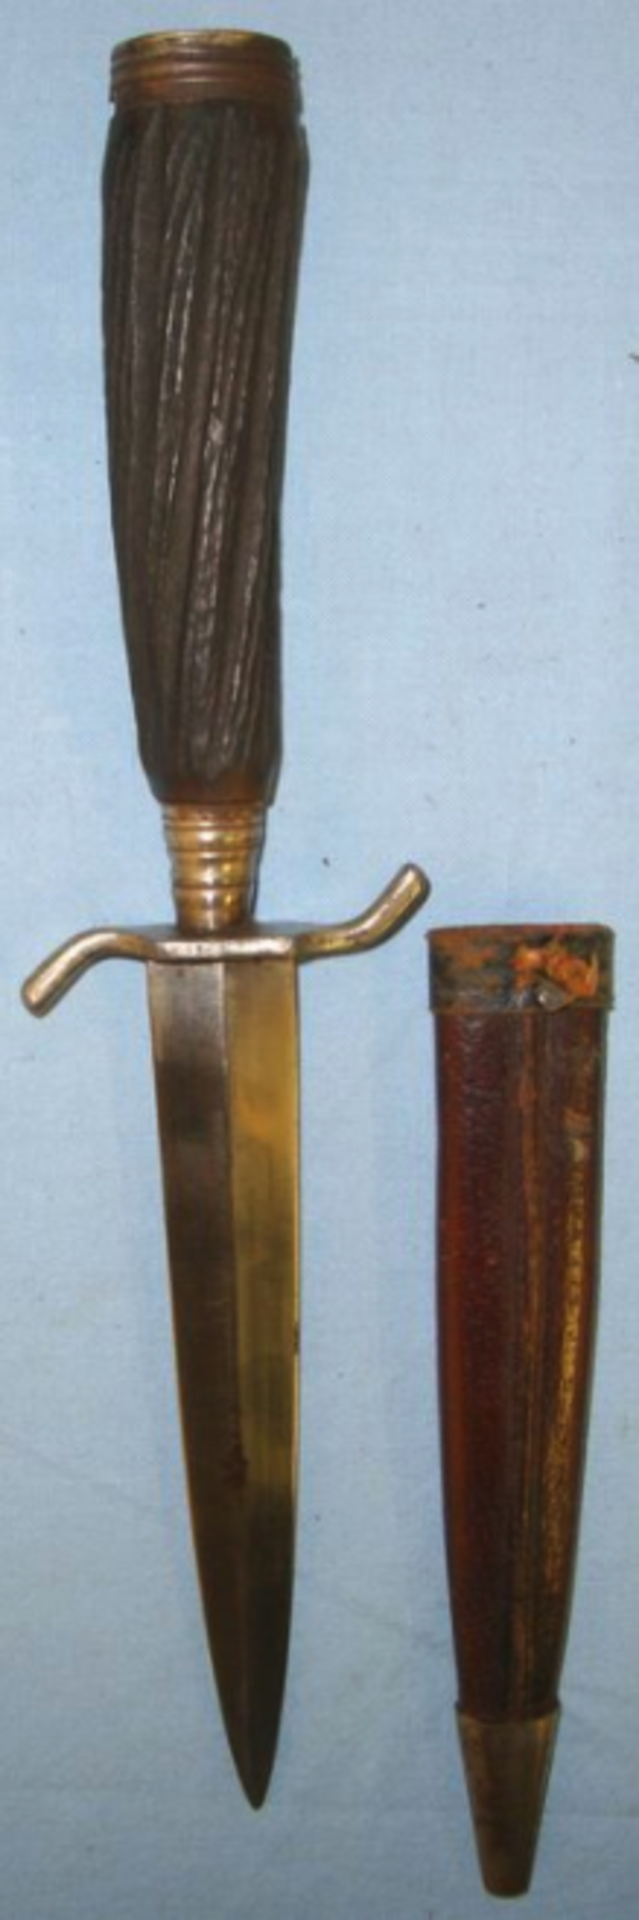 WW1 German Trench/Fighting Knife With Carved Wood Simulated Stag-Horn Hilt & Scabbard - Image 3 of 3